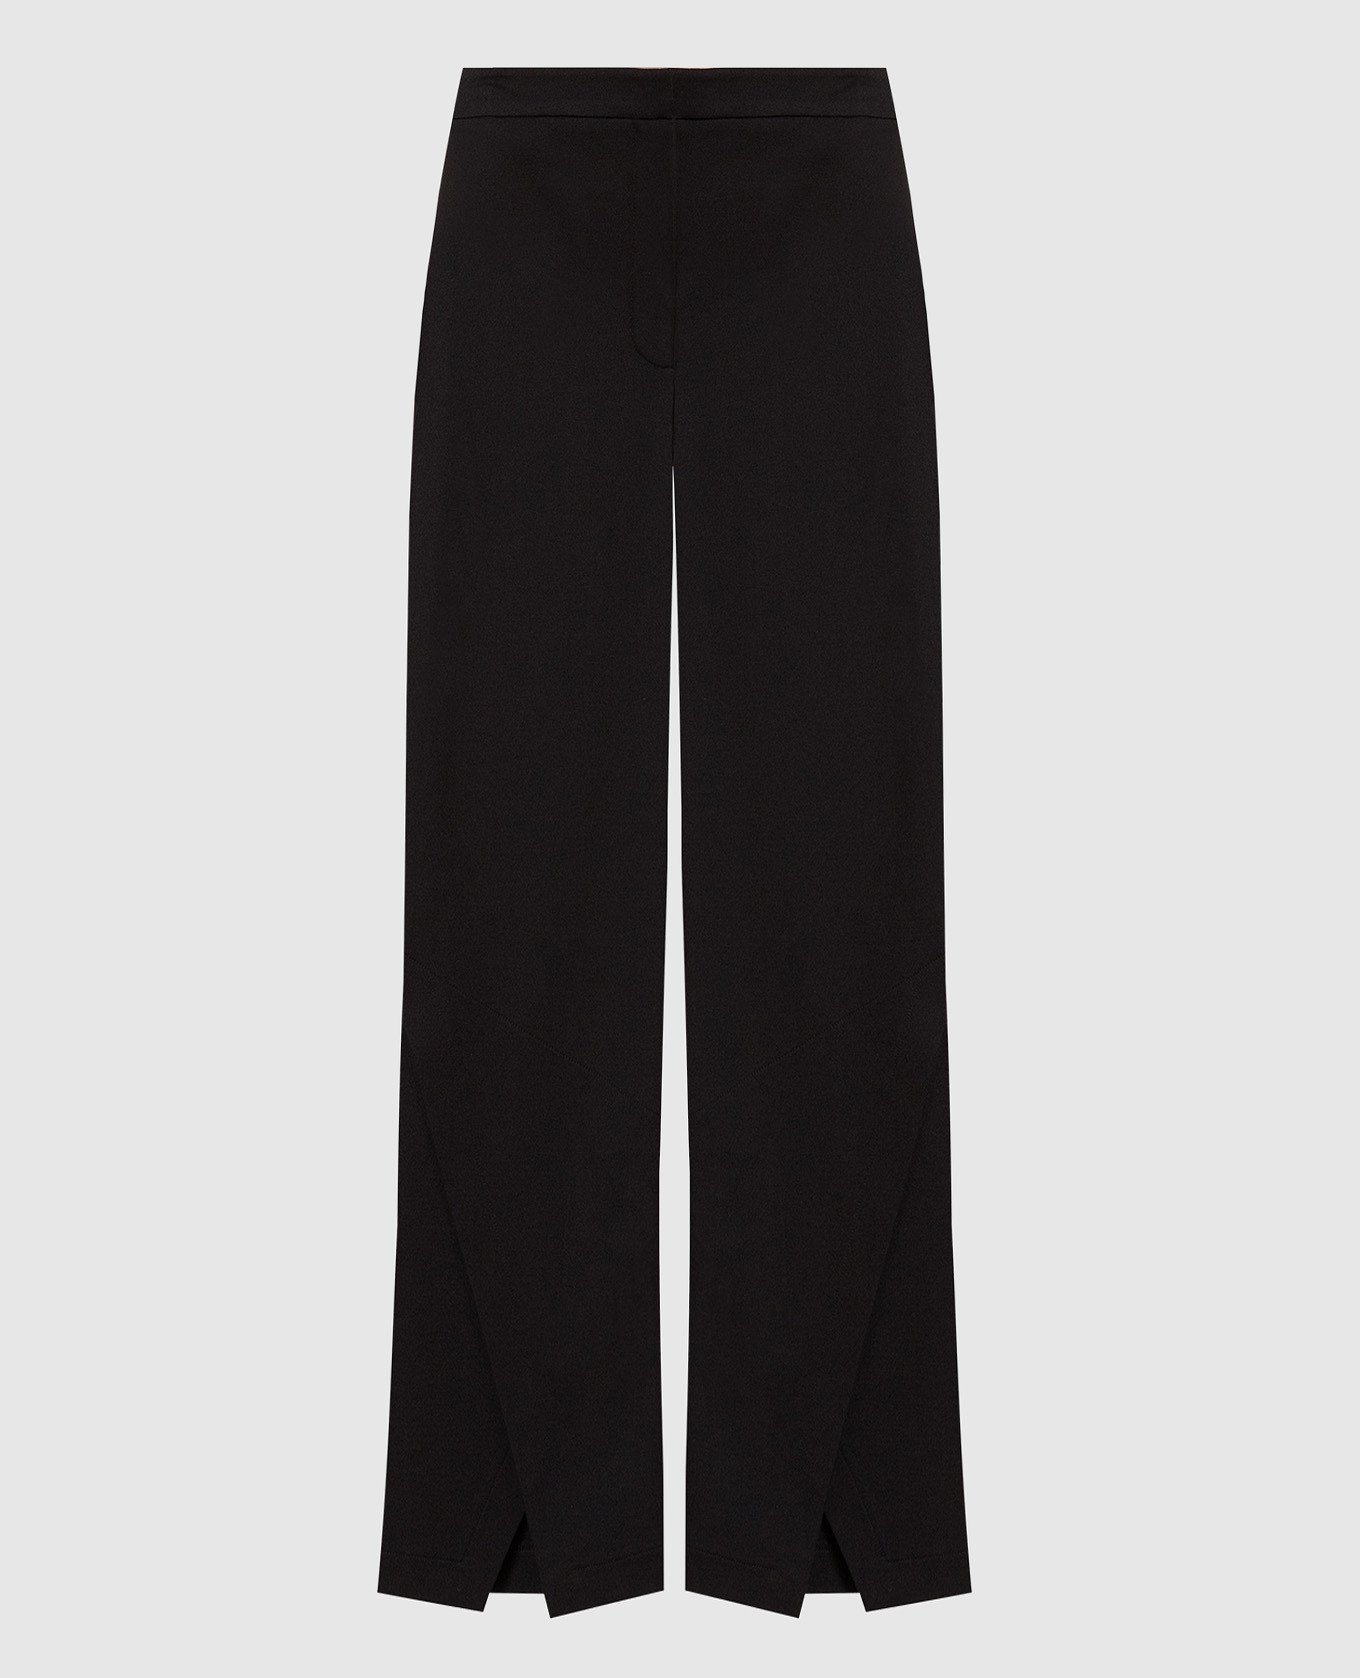 Black flared pants with slits